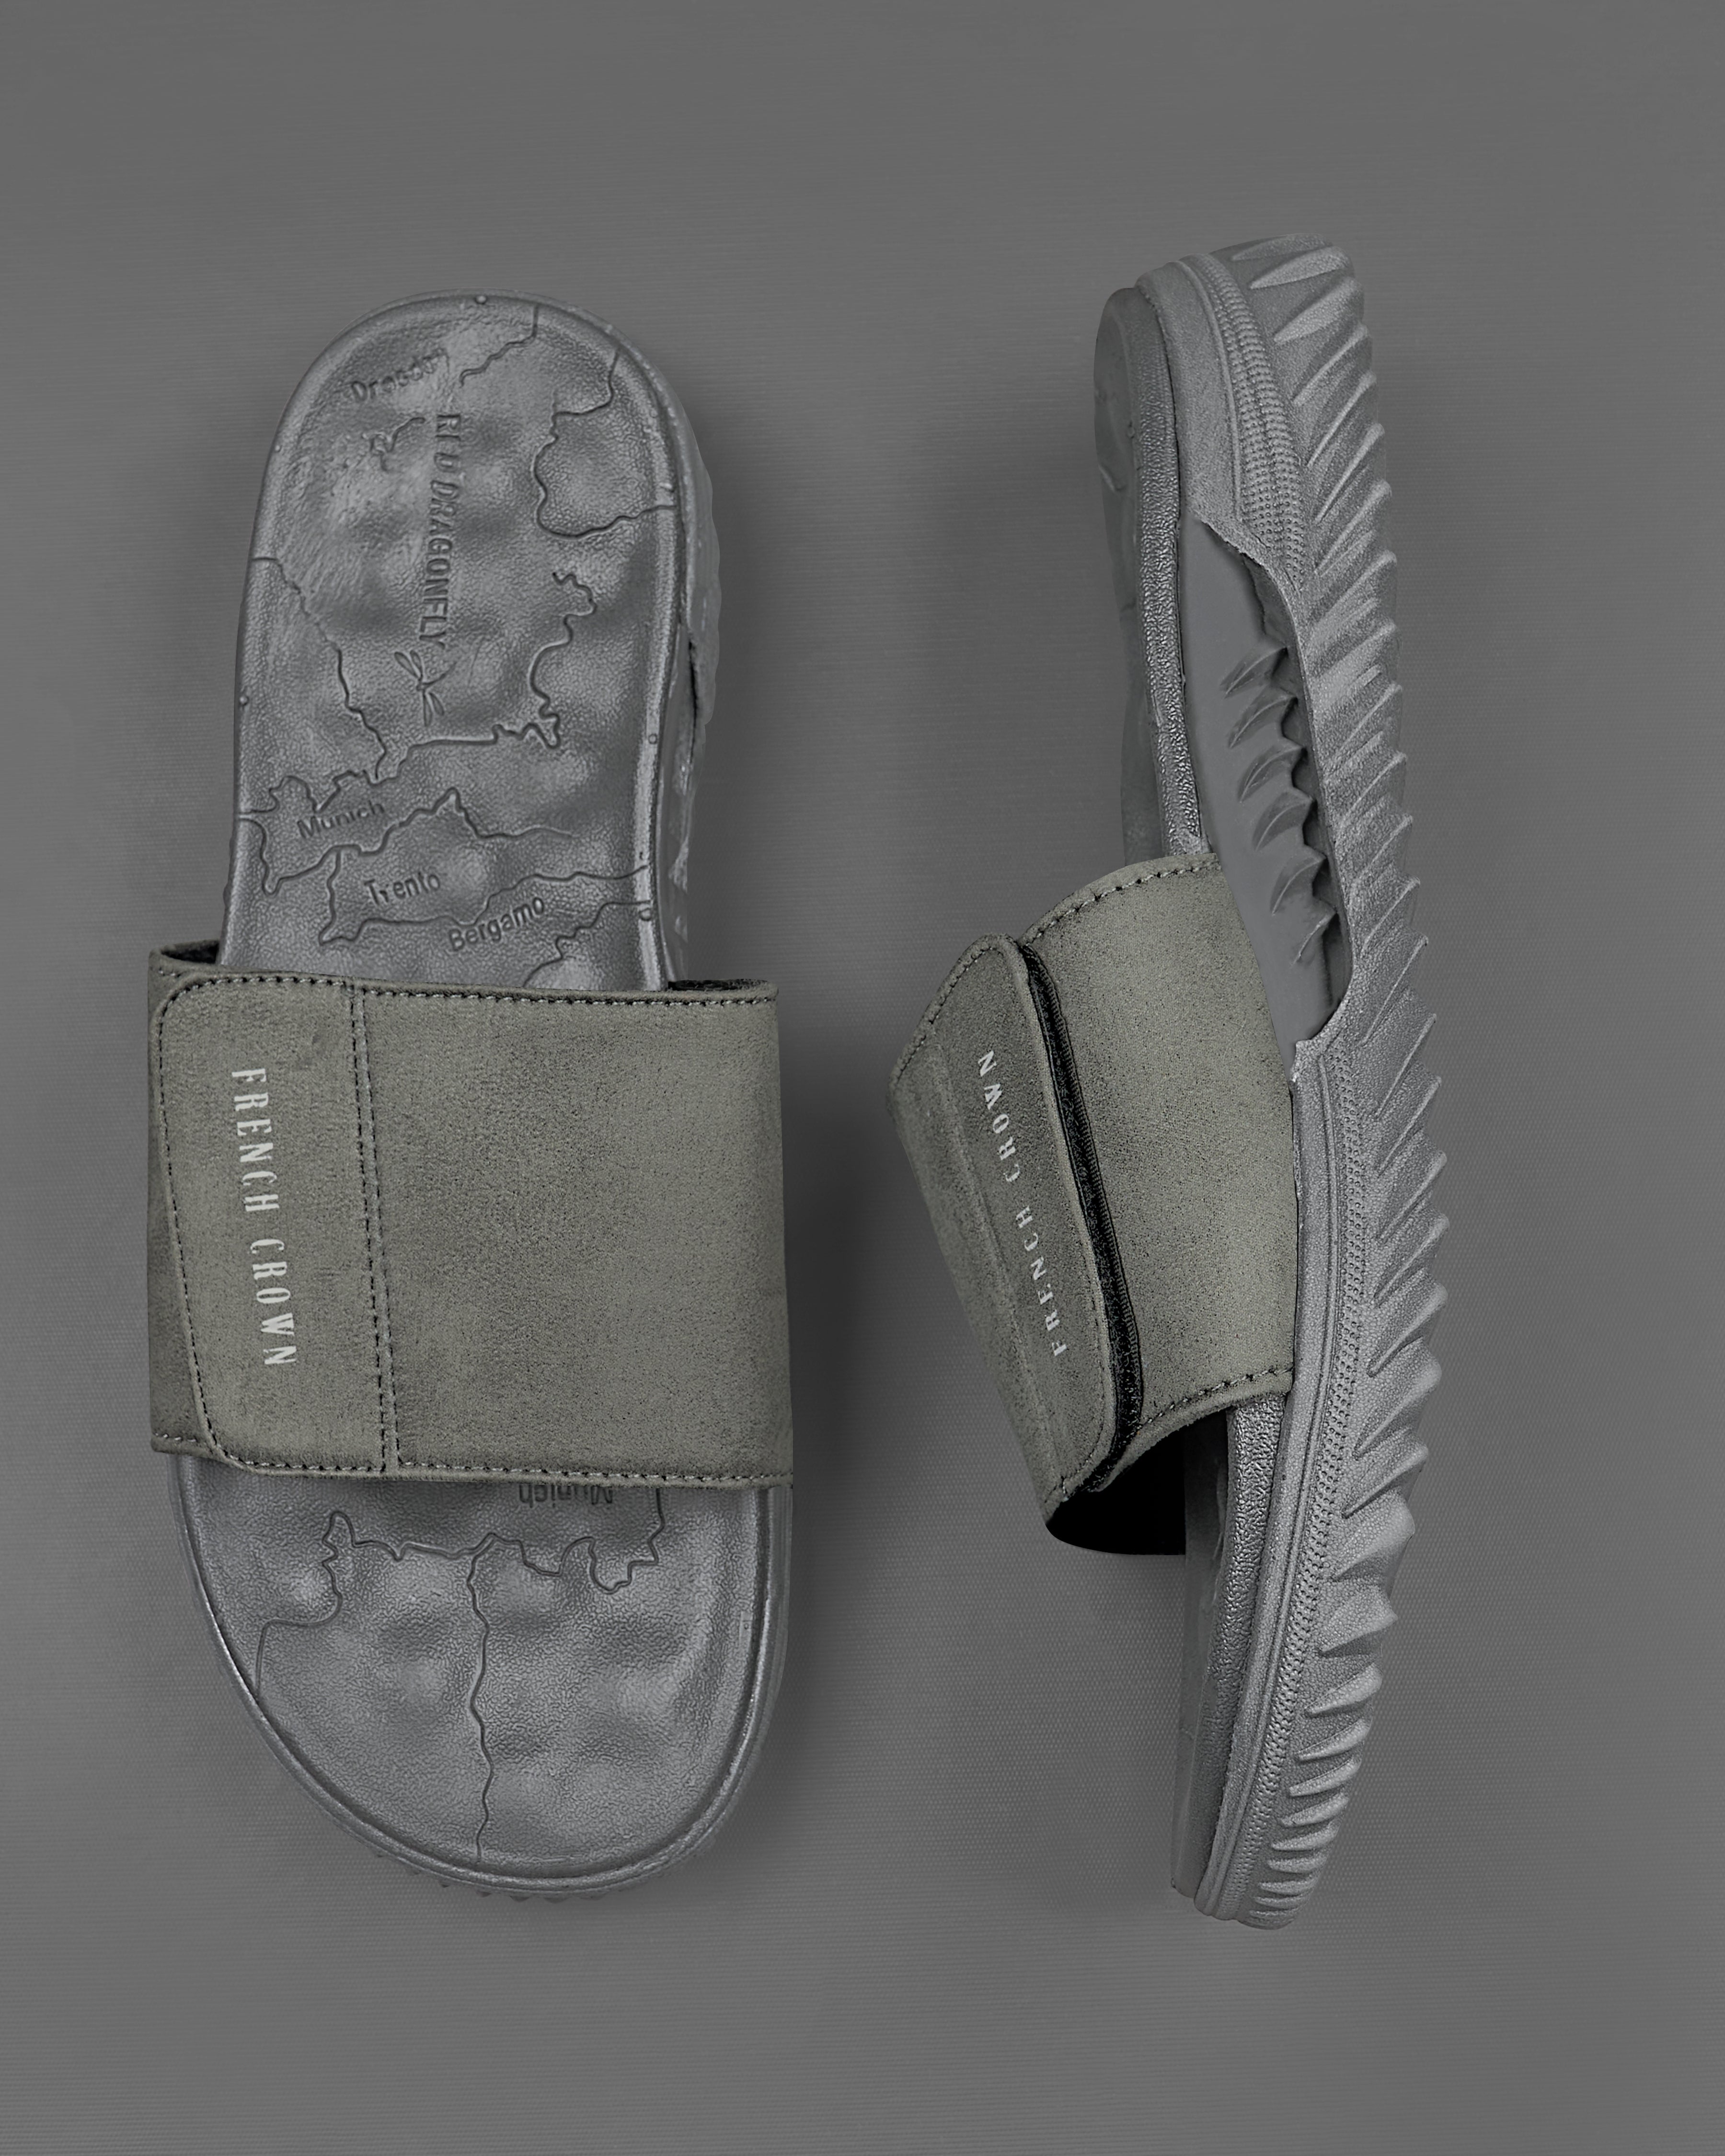 Light Grey Map Patterned Suede top comfortable Sliders